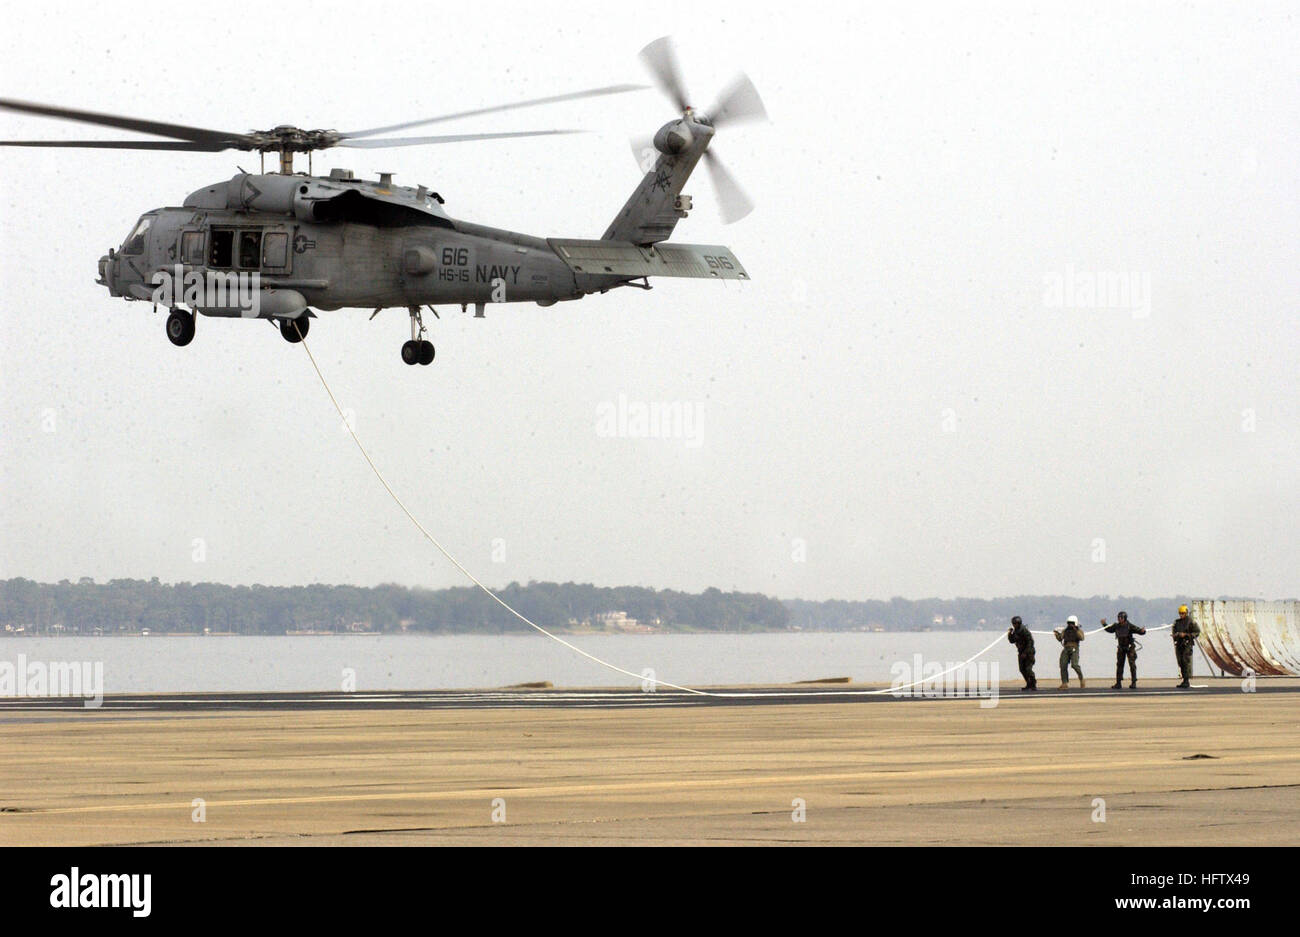 070807-N-3503S-002 JACKSONVILLE, Fla. (Aug. 7, 2007) - Sailors assigned to Explosive Ordnance Disposal Mobile Unit Six (EODMU) 6, hold a line attached to an HH-60H Seahawk helicopter assigned to the ÒRed LionsÓ of Helicopter Anti-Submarine Squadron Fifteen (HS) 15. The EOD team conducted Special Purpose Insertion-Extraction (SPIE) training over the Saint Johns River. U.S. Navy photo by Mass Communication Specialist 2nd Class Brain Smarr (RELEASED) US Navy 070807-N-3503S-002 Sailors assigned to Explosive Ordnance Disposal Mobile Unit Six (EODMU) 6, hold a line attached to an HH-60H Seahawk heli Stock Photo